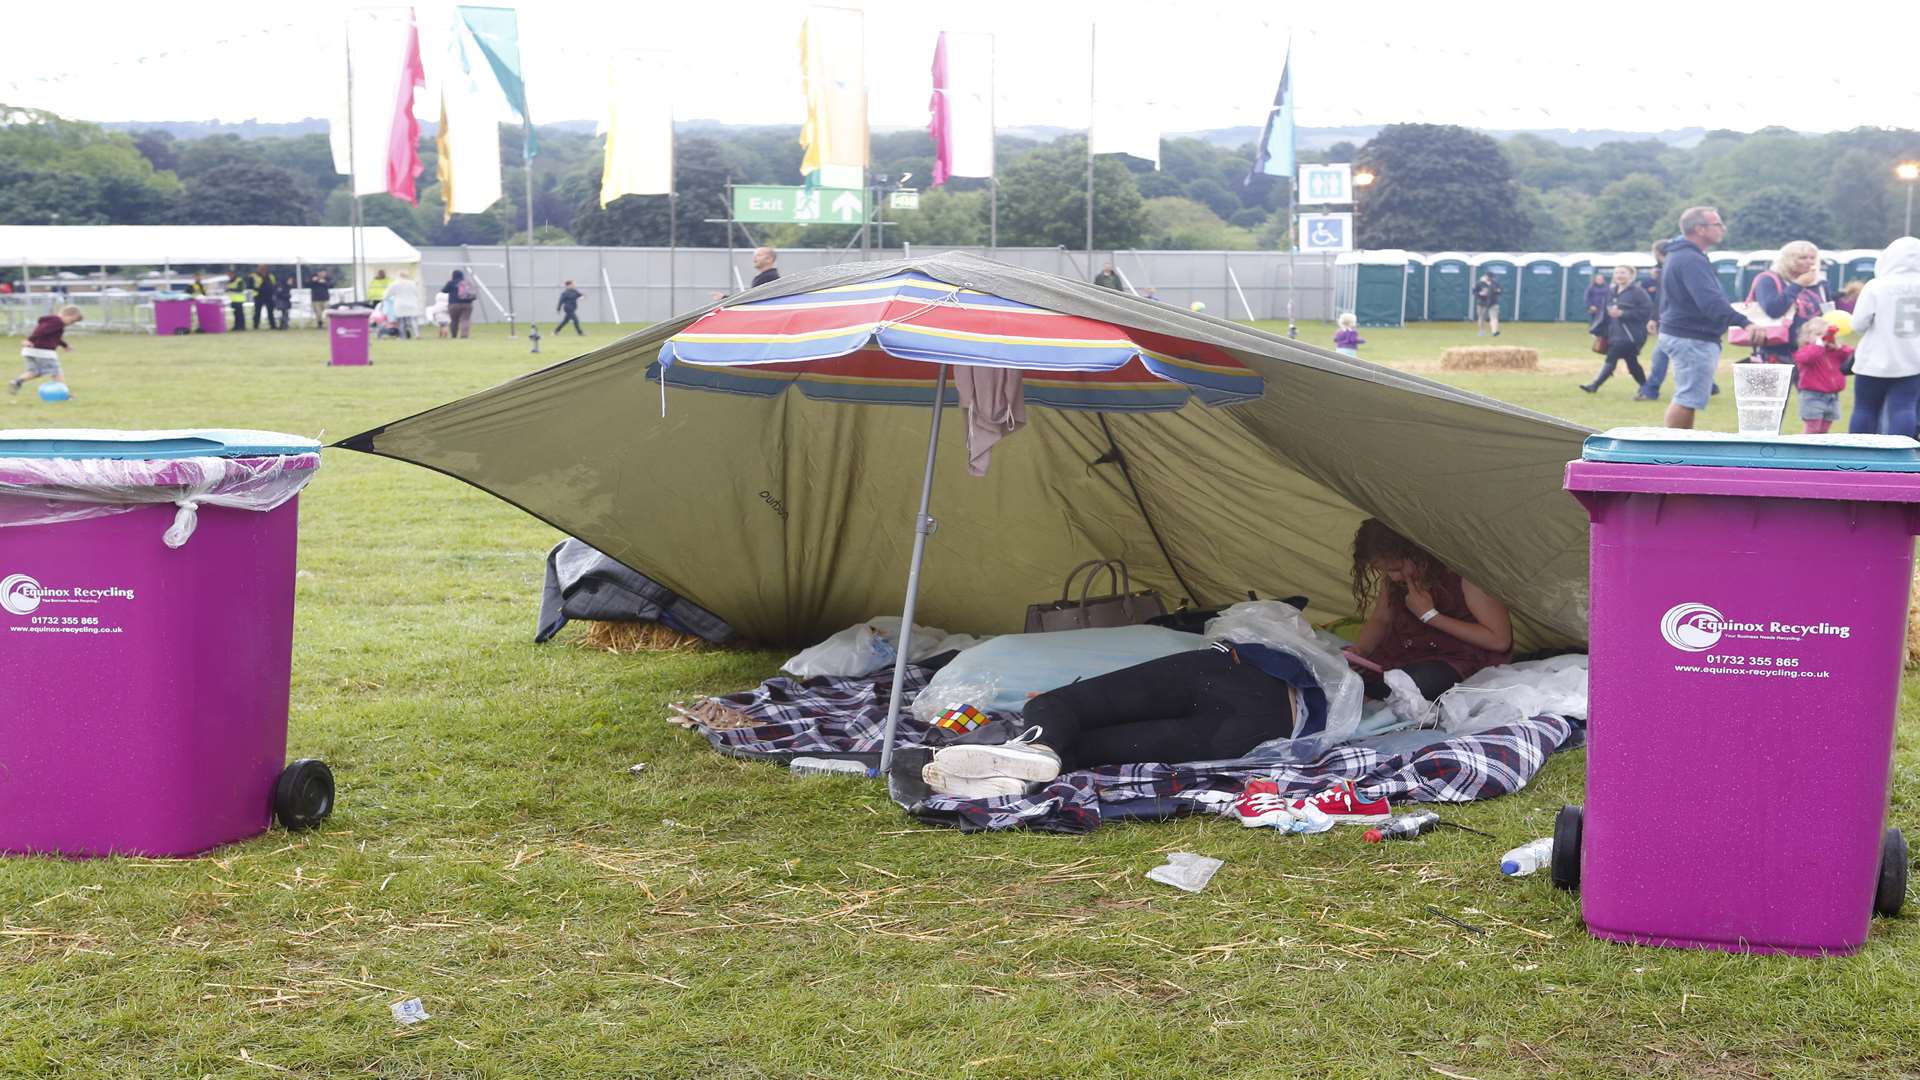 Some festival goers resorted to makeshift shelters as the weather turned on Saturday